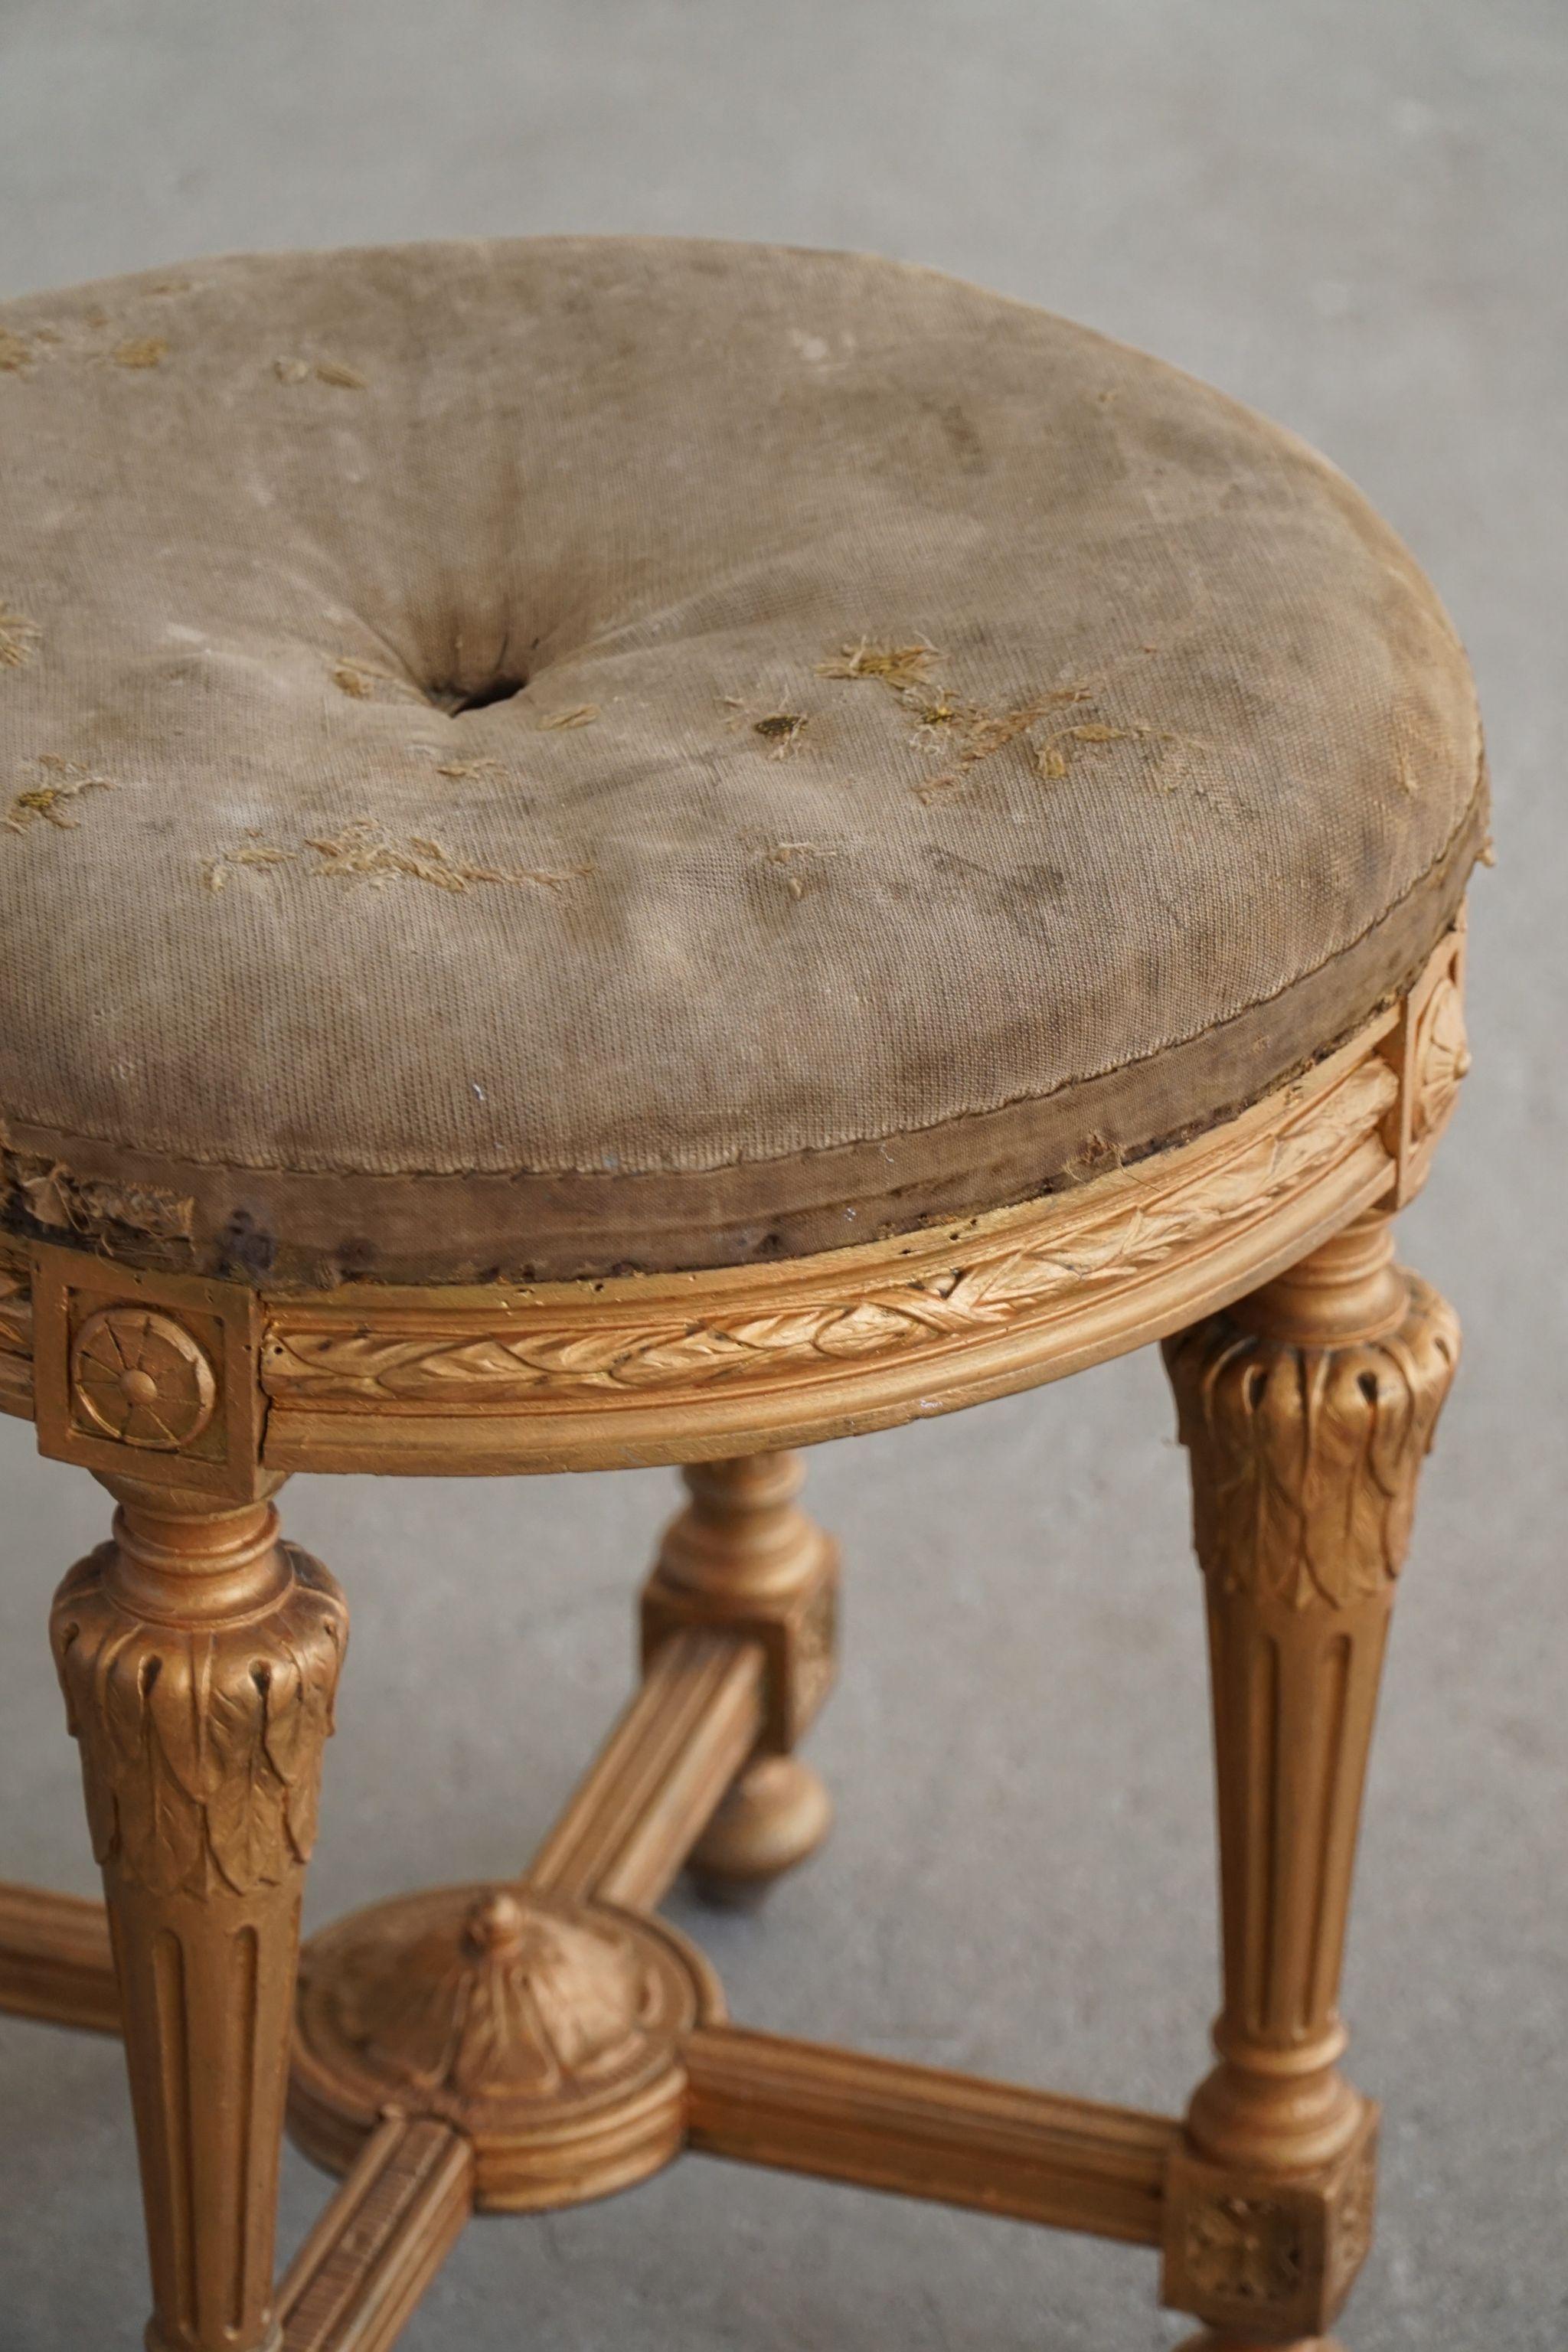 Hand-Carved Gustavian Antique, Round Stool, Swedish Cabinetmaker, Late 18th Century For Sale